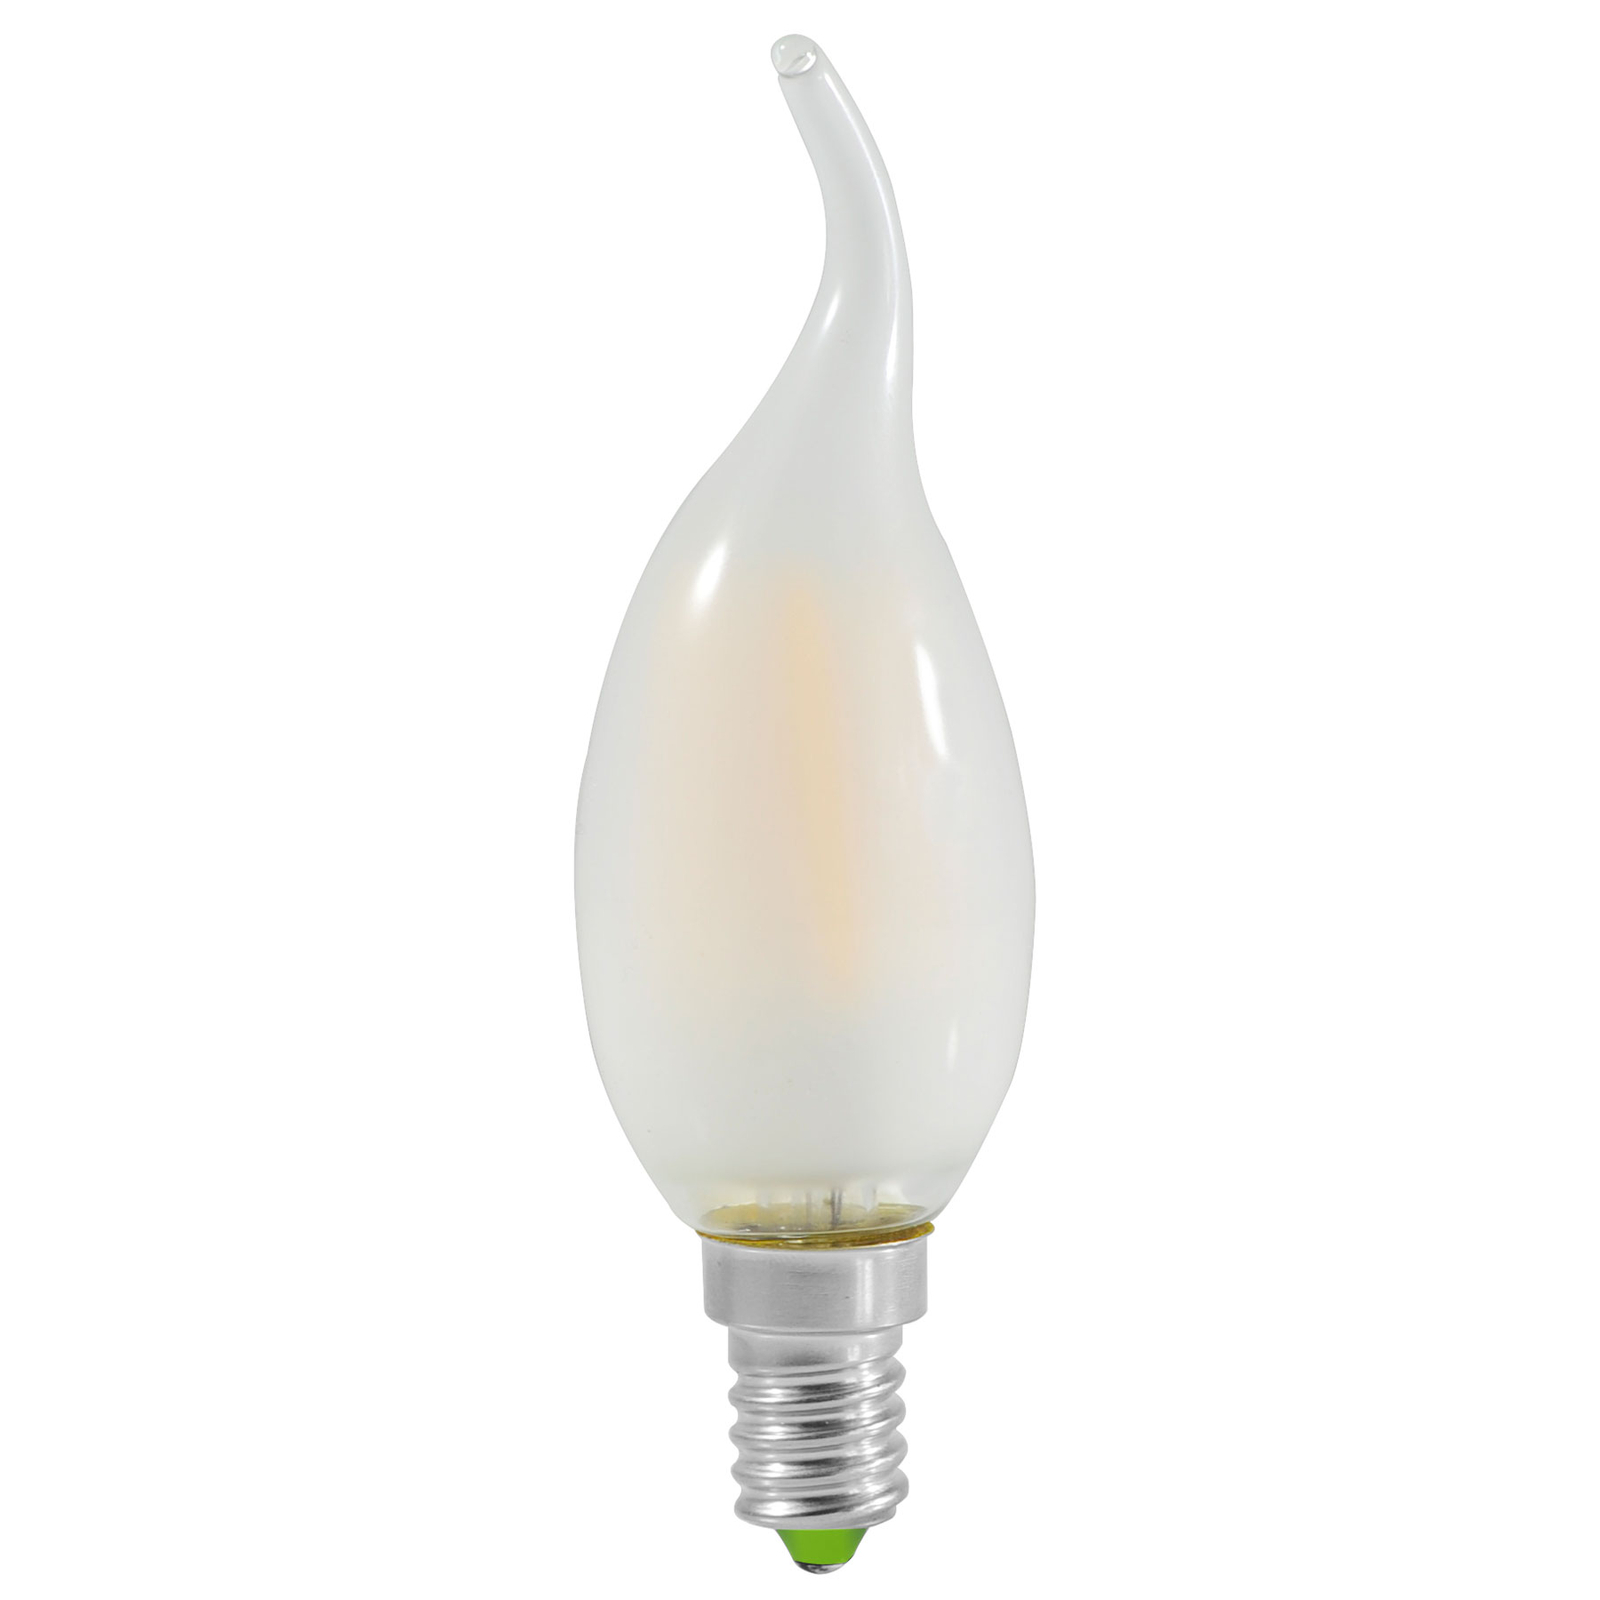 Flame tip LED candle E14 4W 450lm warm white 6x